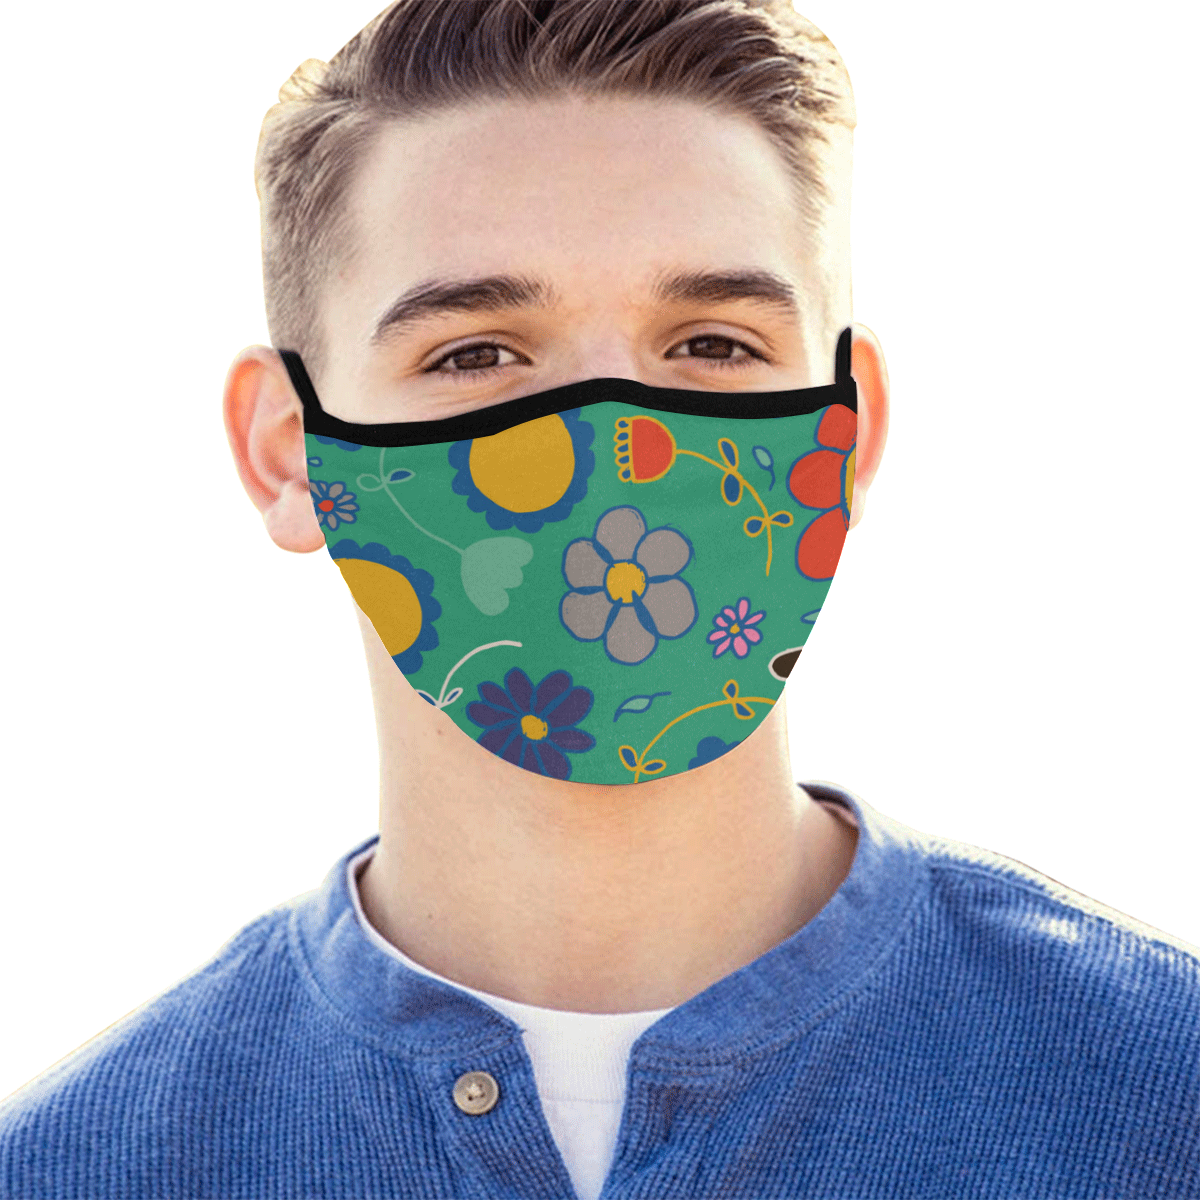 spring flower green Mouth Mask